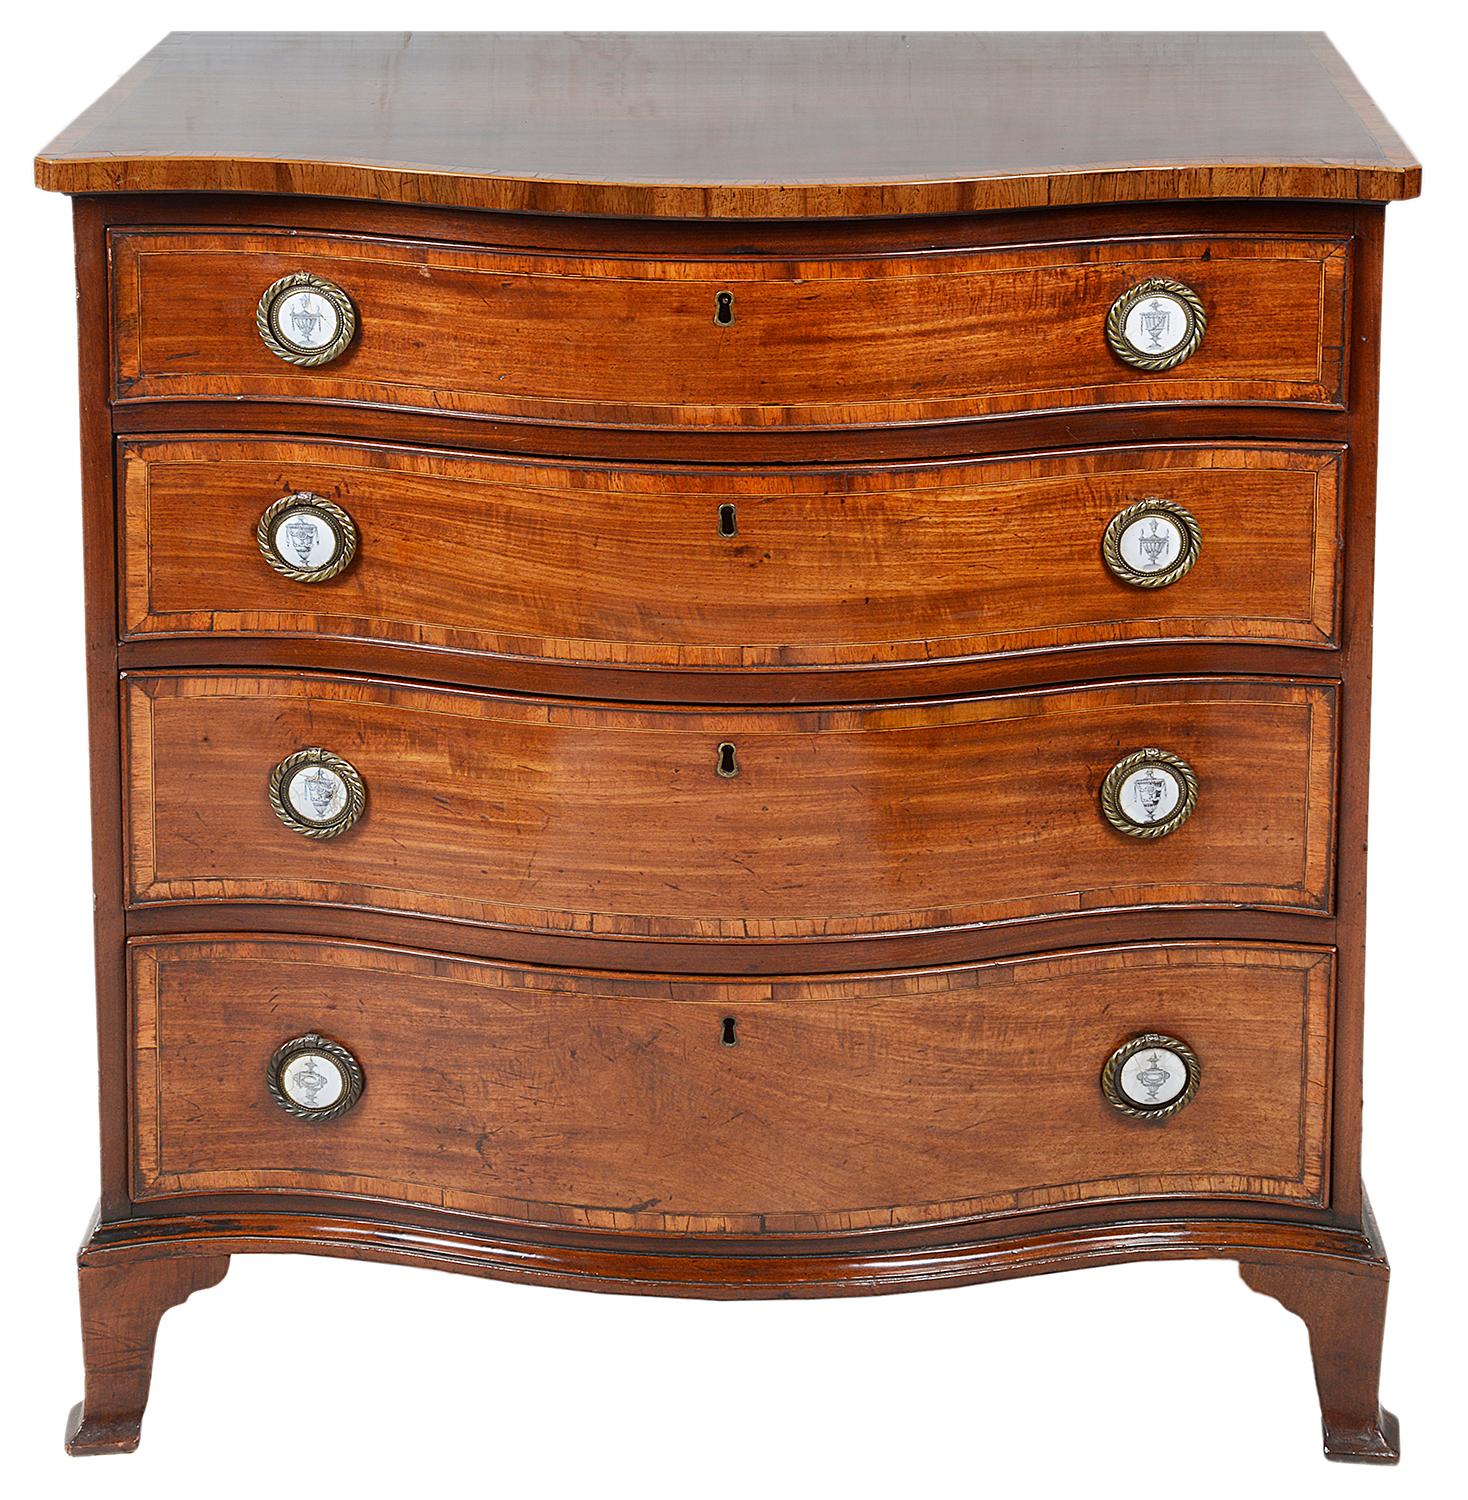 A very good quality late 18th century Georgian Mahogany serpentine fronted chest. Having a crossbanded top, the top drawer opening to reveal a writing slide, this slides back to further reveal compartments and lidded sections within. Three further